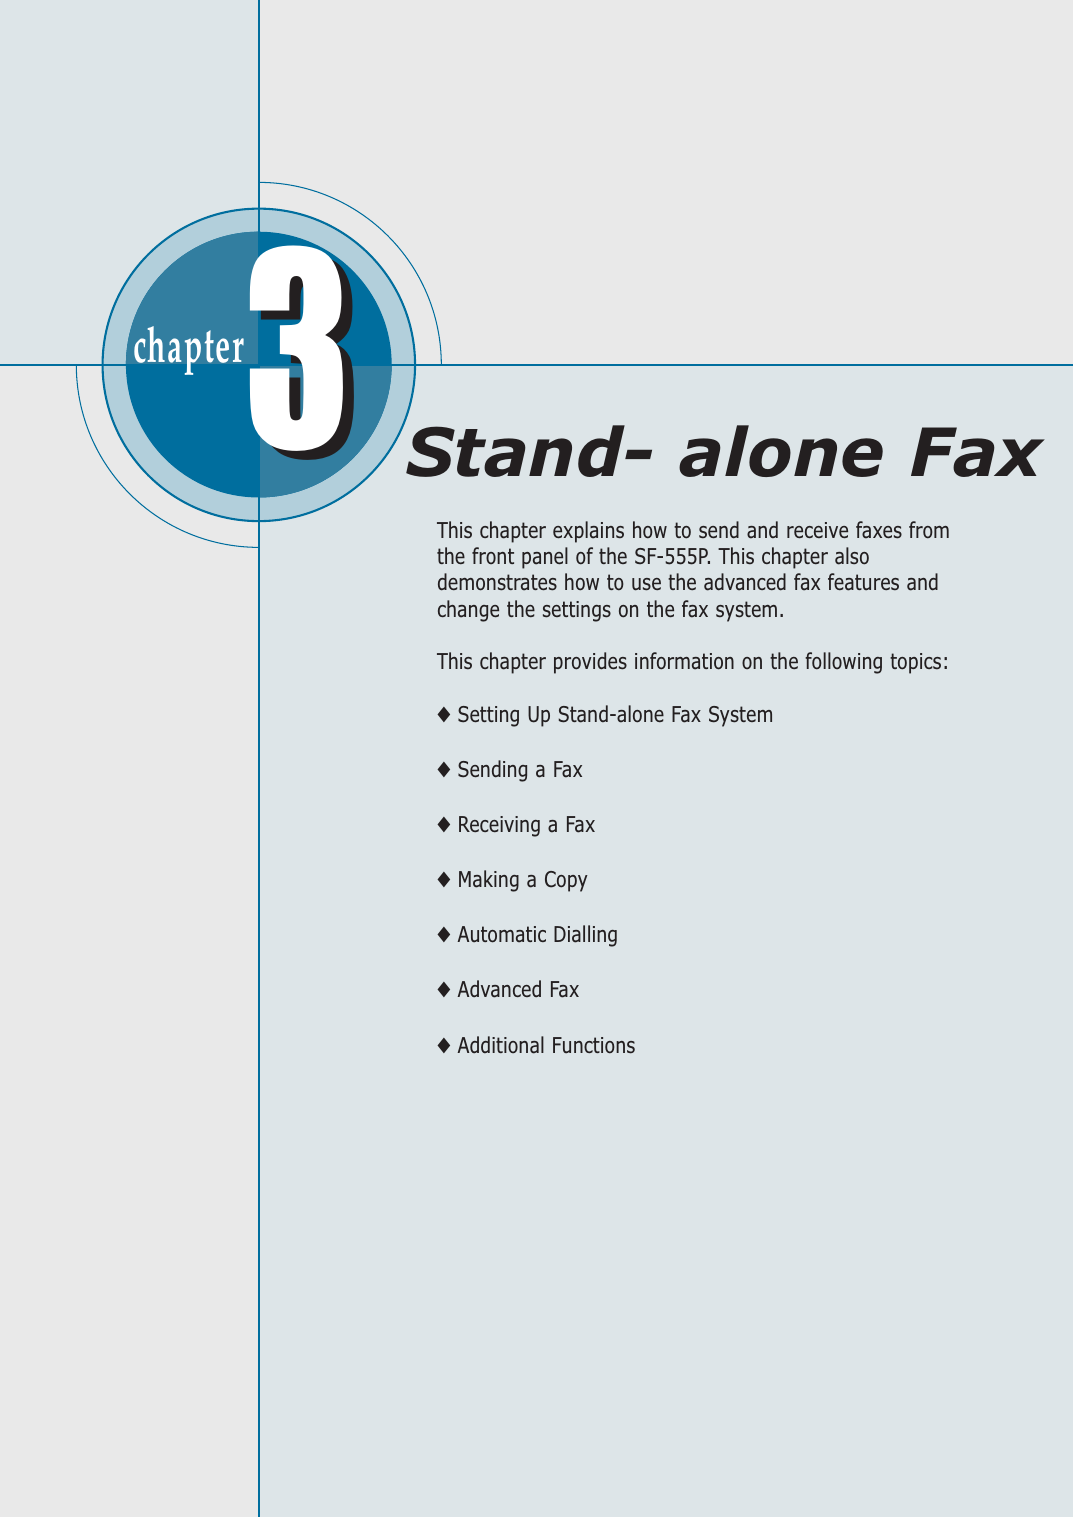 chapter  33This chapter explains how to send and receive faxes fromthe front panel of the SF-555P. This chapter alsodemonstrates how to use the advanced fax features andchange the settings on the fax system.This chapter provides information on the following topics:◆Setting Up Stand-alone Fax System◆Sending a Fax◆Receiving a Fax◆Making a Copy◆Automatic Dialling◆Advanced Fax◆Additional FunctionsStand- alone Fax